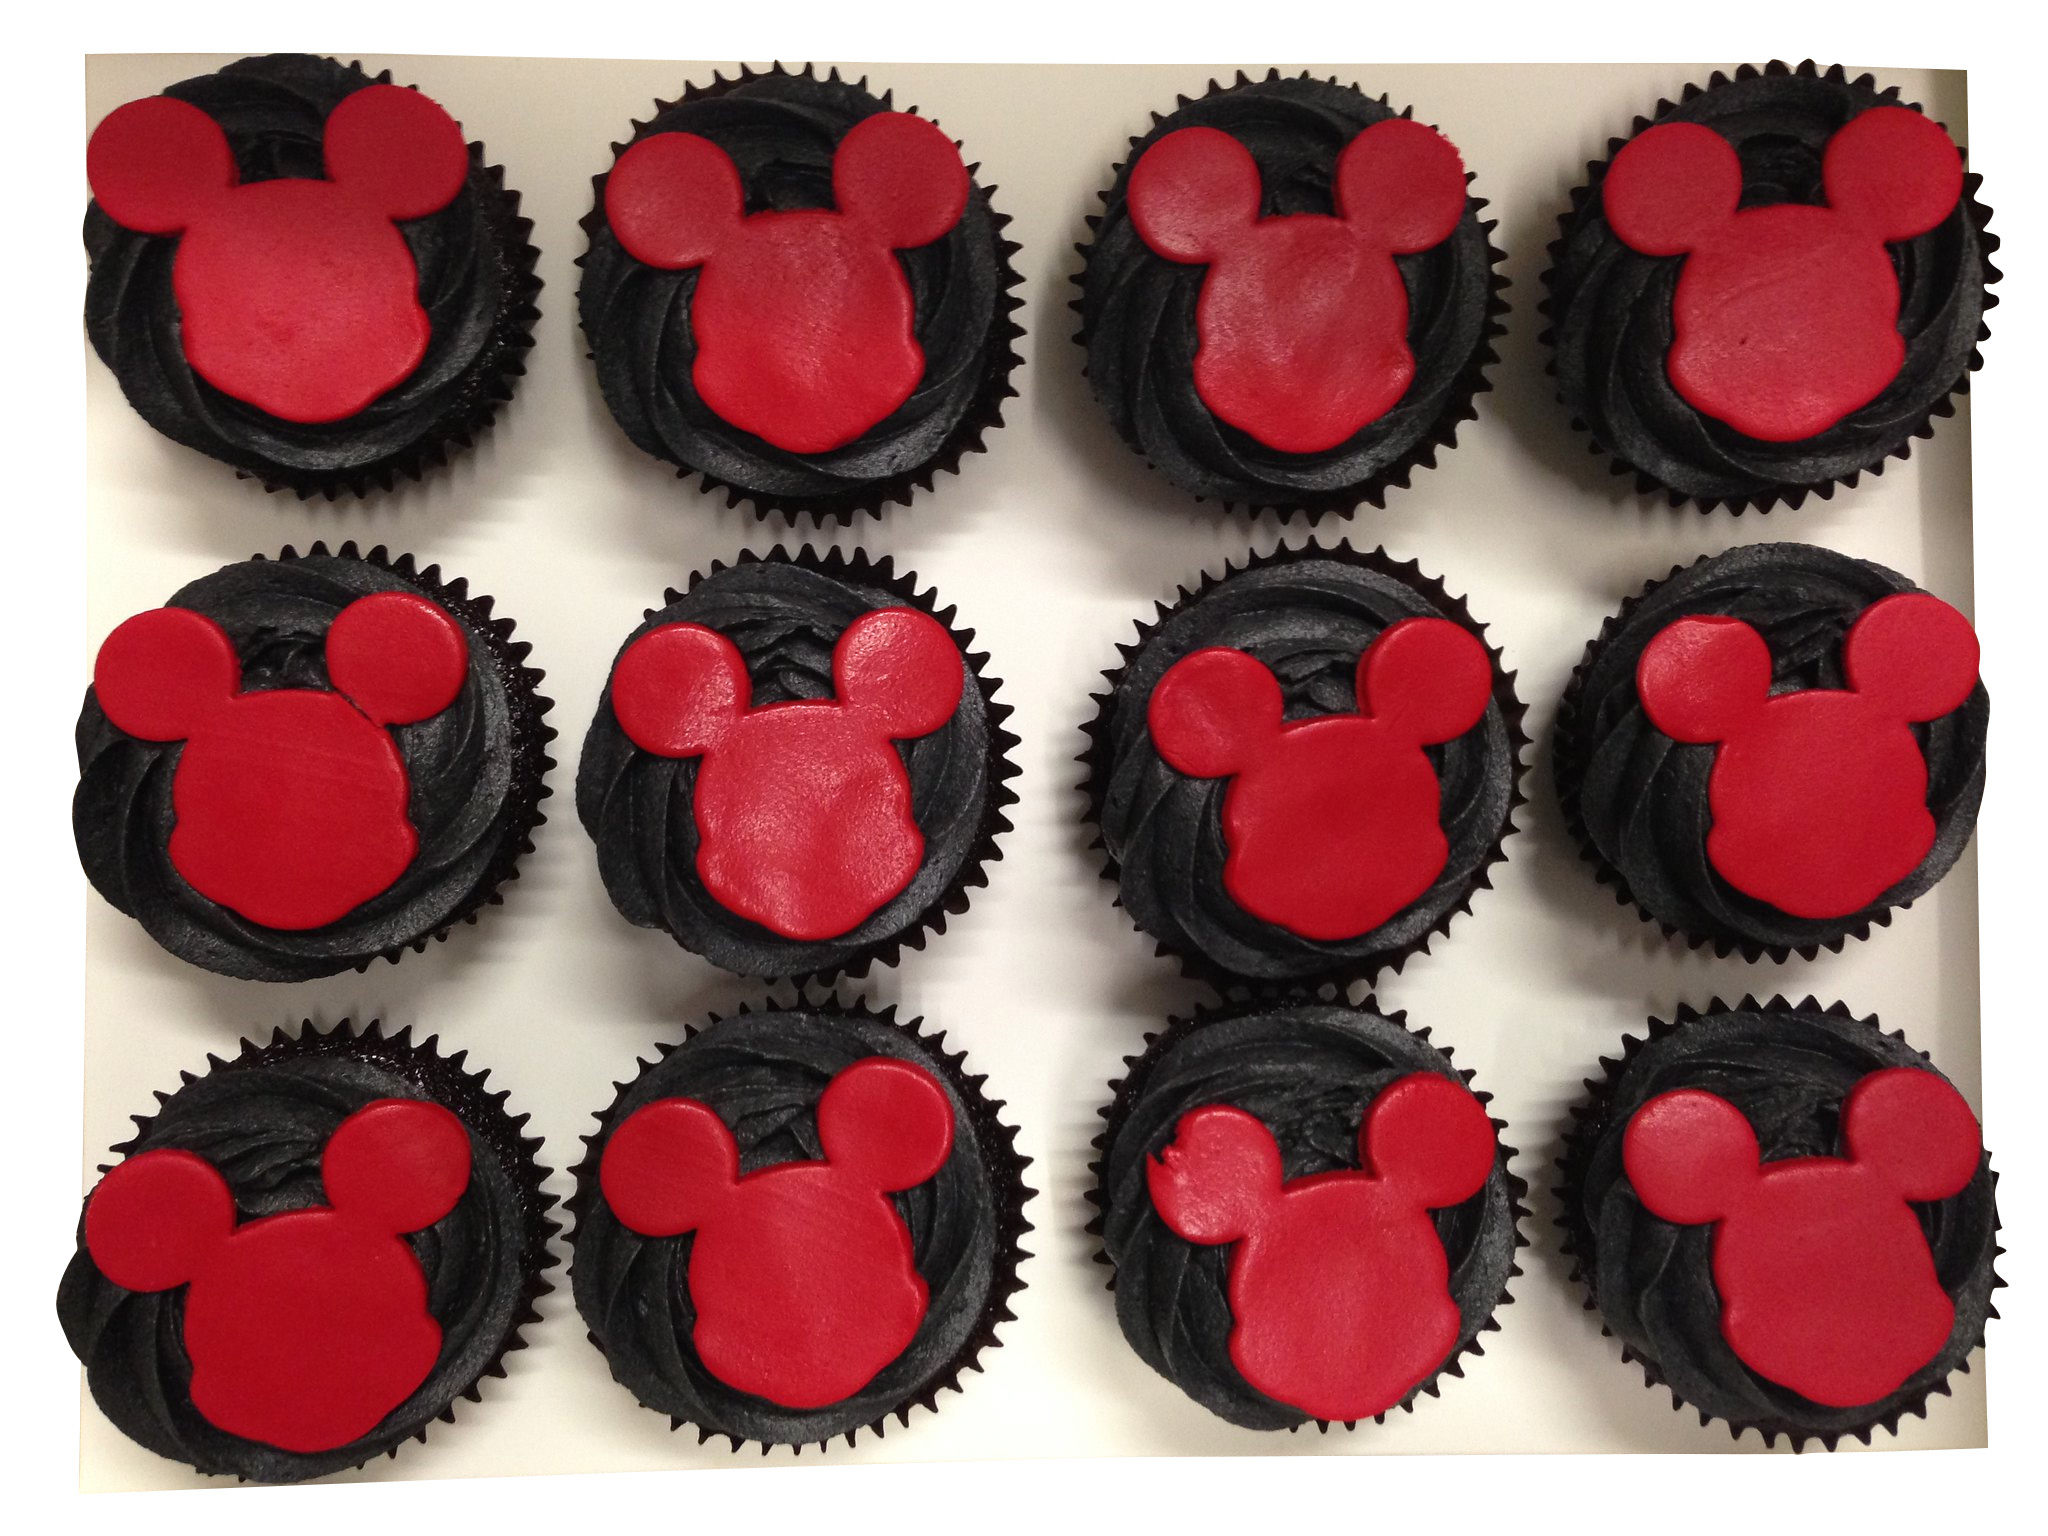 Black Frosting Mickey Mouse Theme Cupcakes - Pack of 6